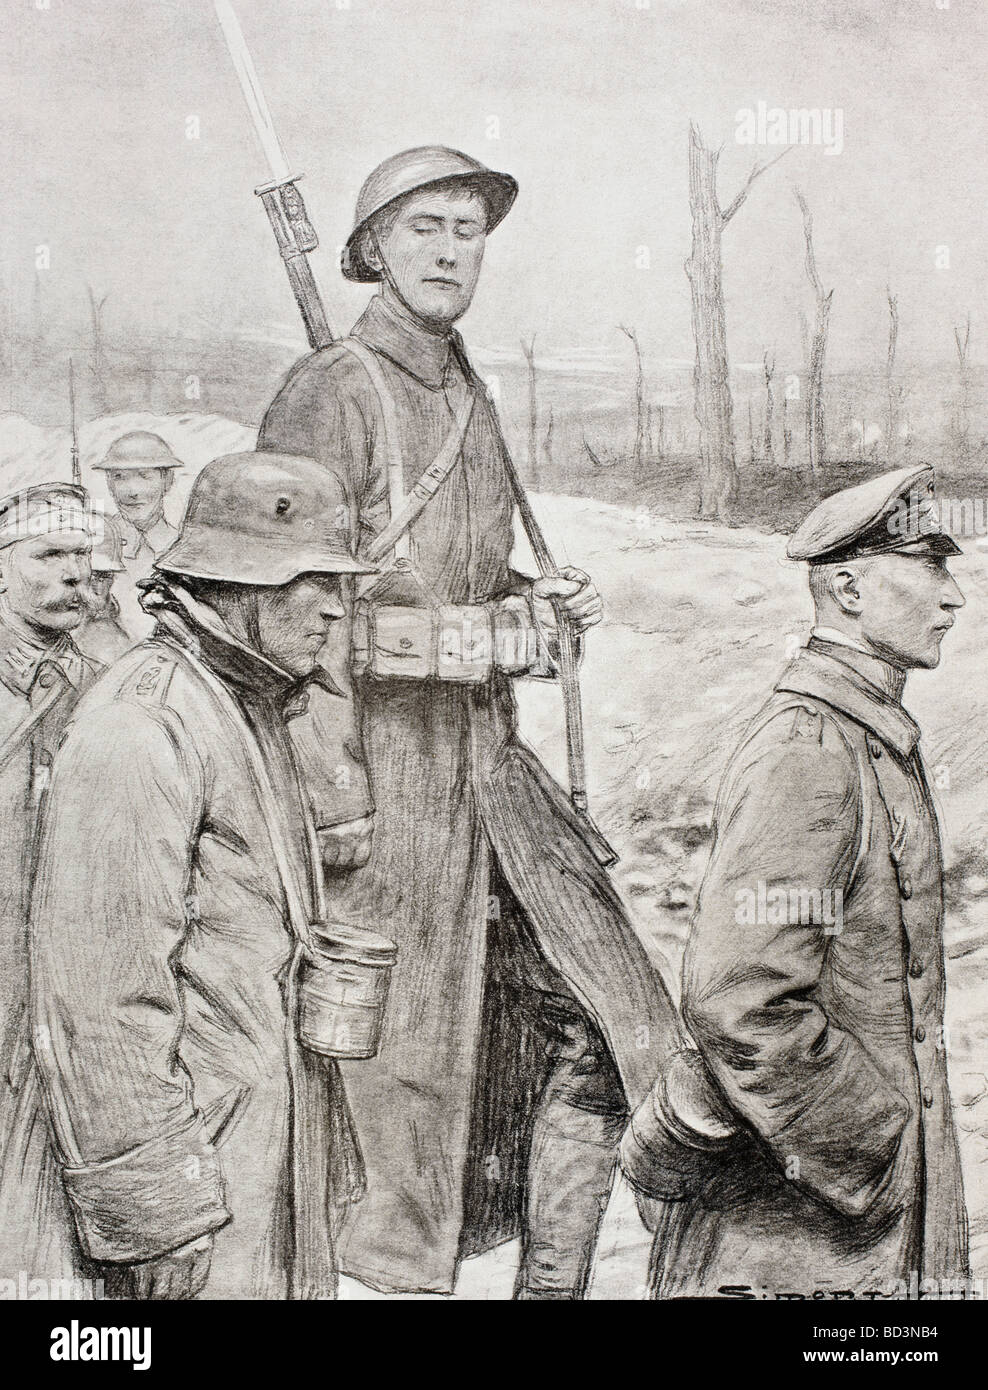 An American soldier guards German prisoners of war in First World War. Stock Photo